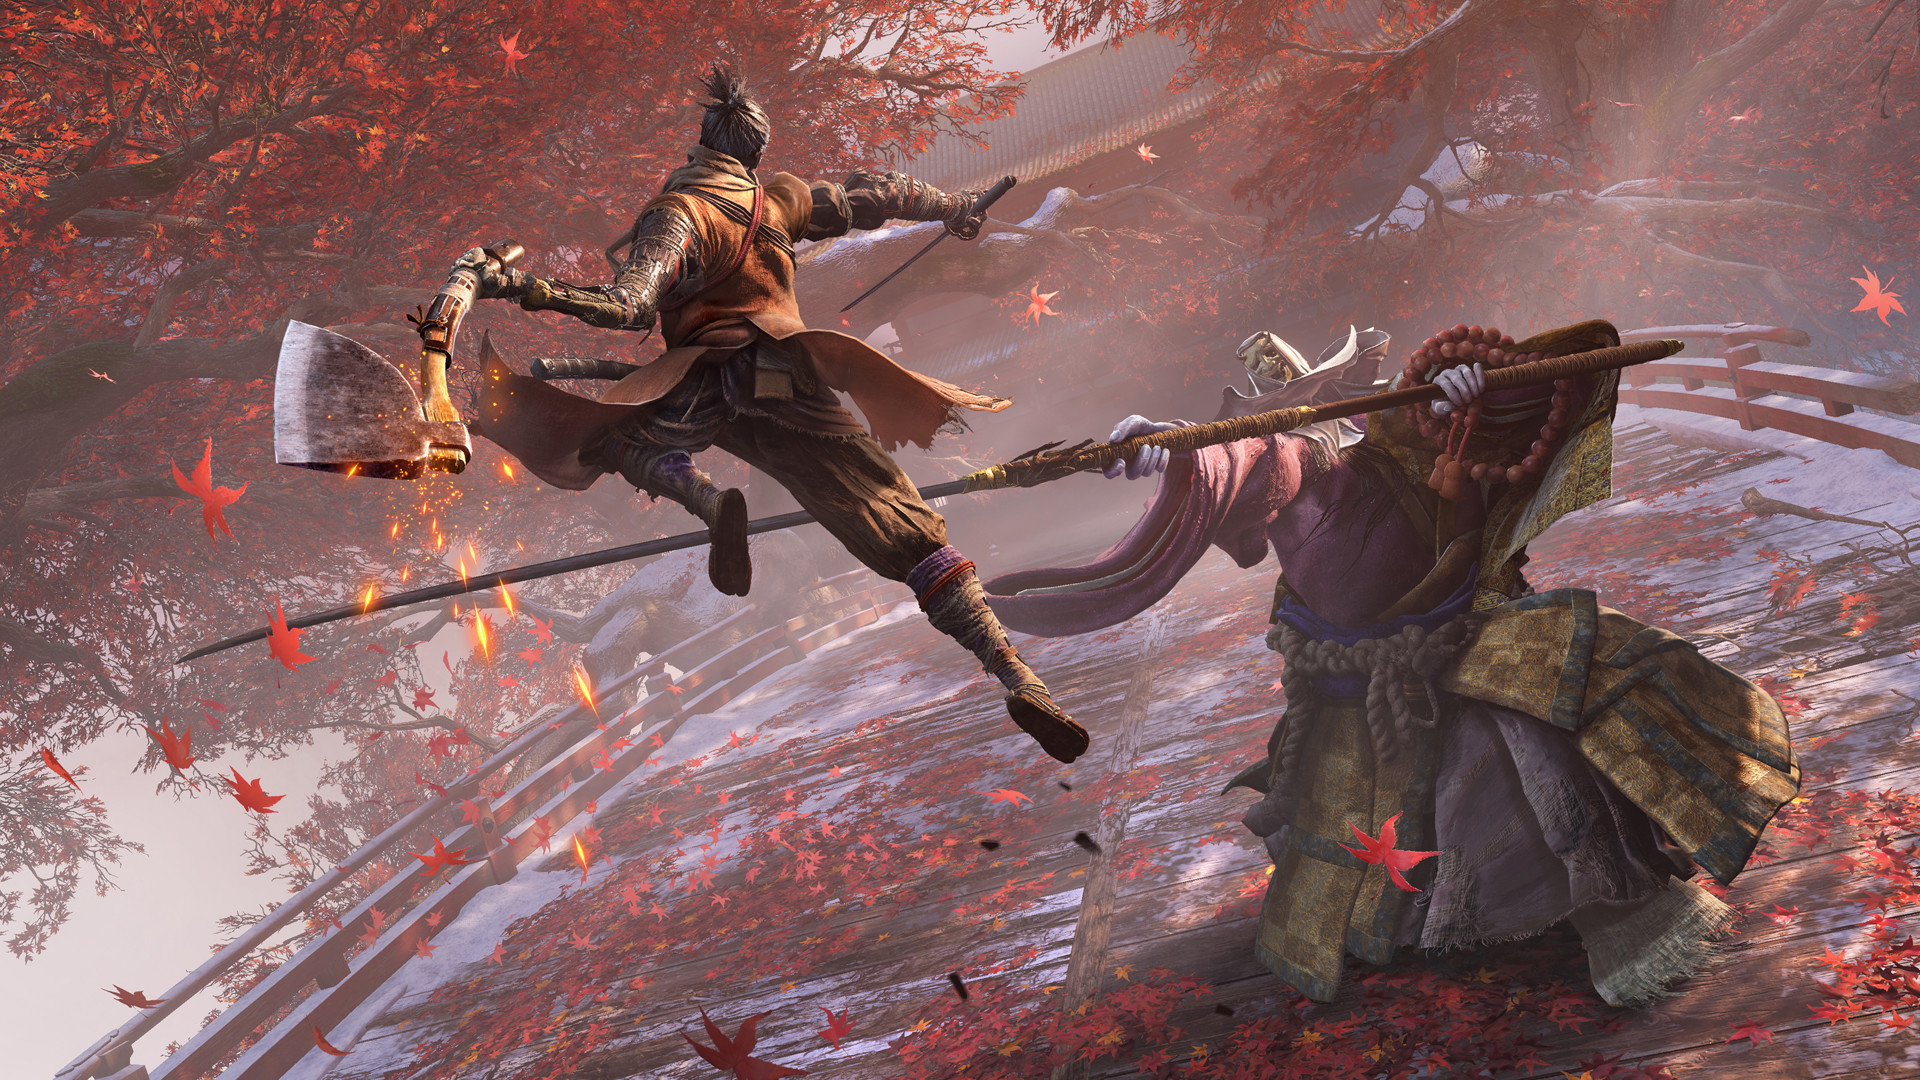 Sekiro: Shadows Die Twice is Steam's Game of the Year 2019 | PC Gamer